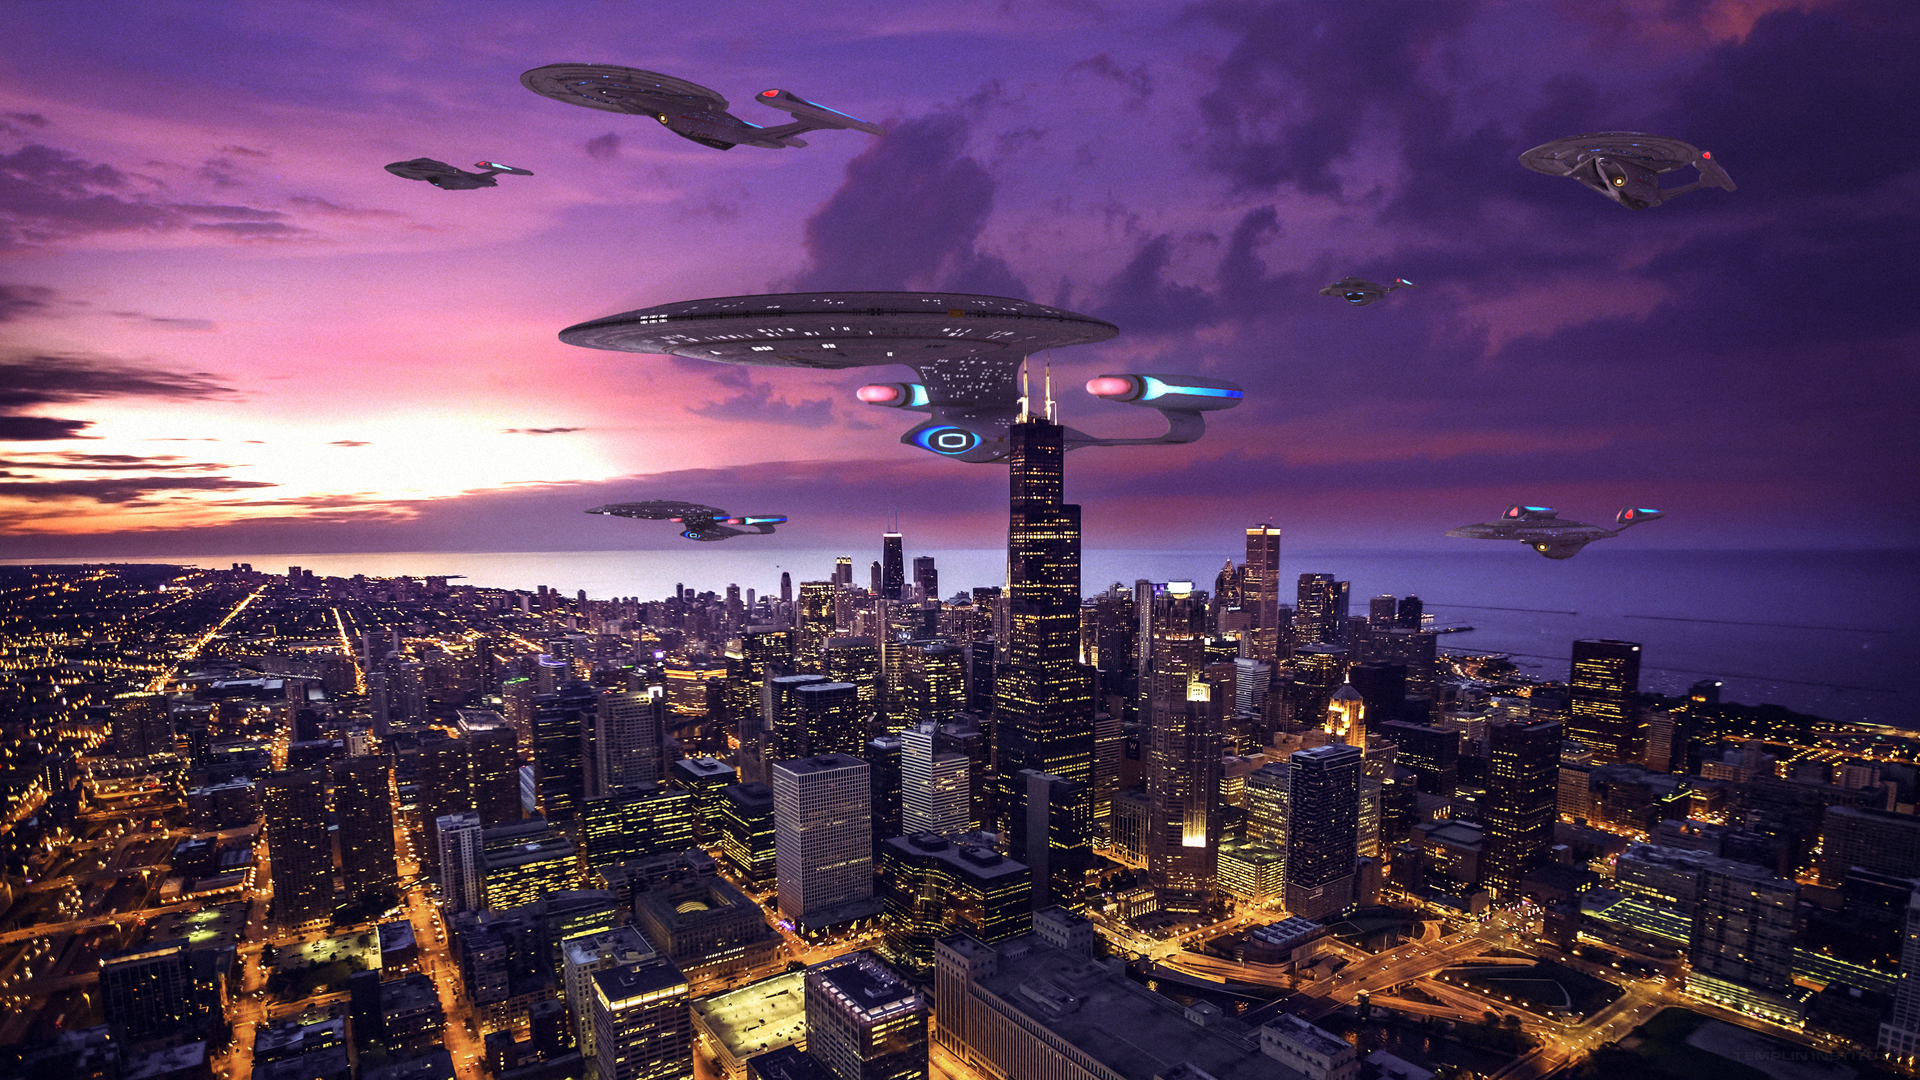 Sci Fi Space Invasion HD Wallpaper | Background Image